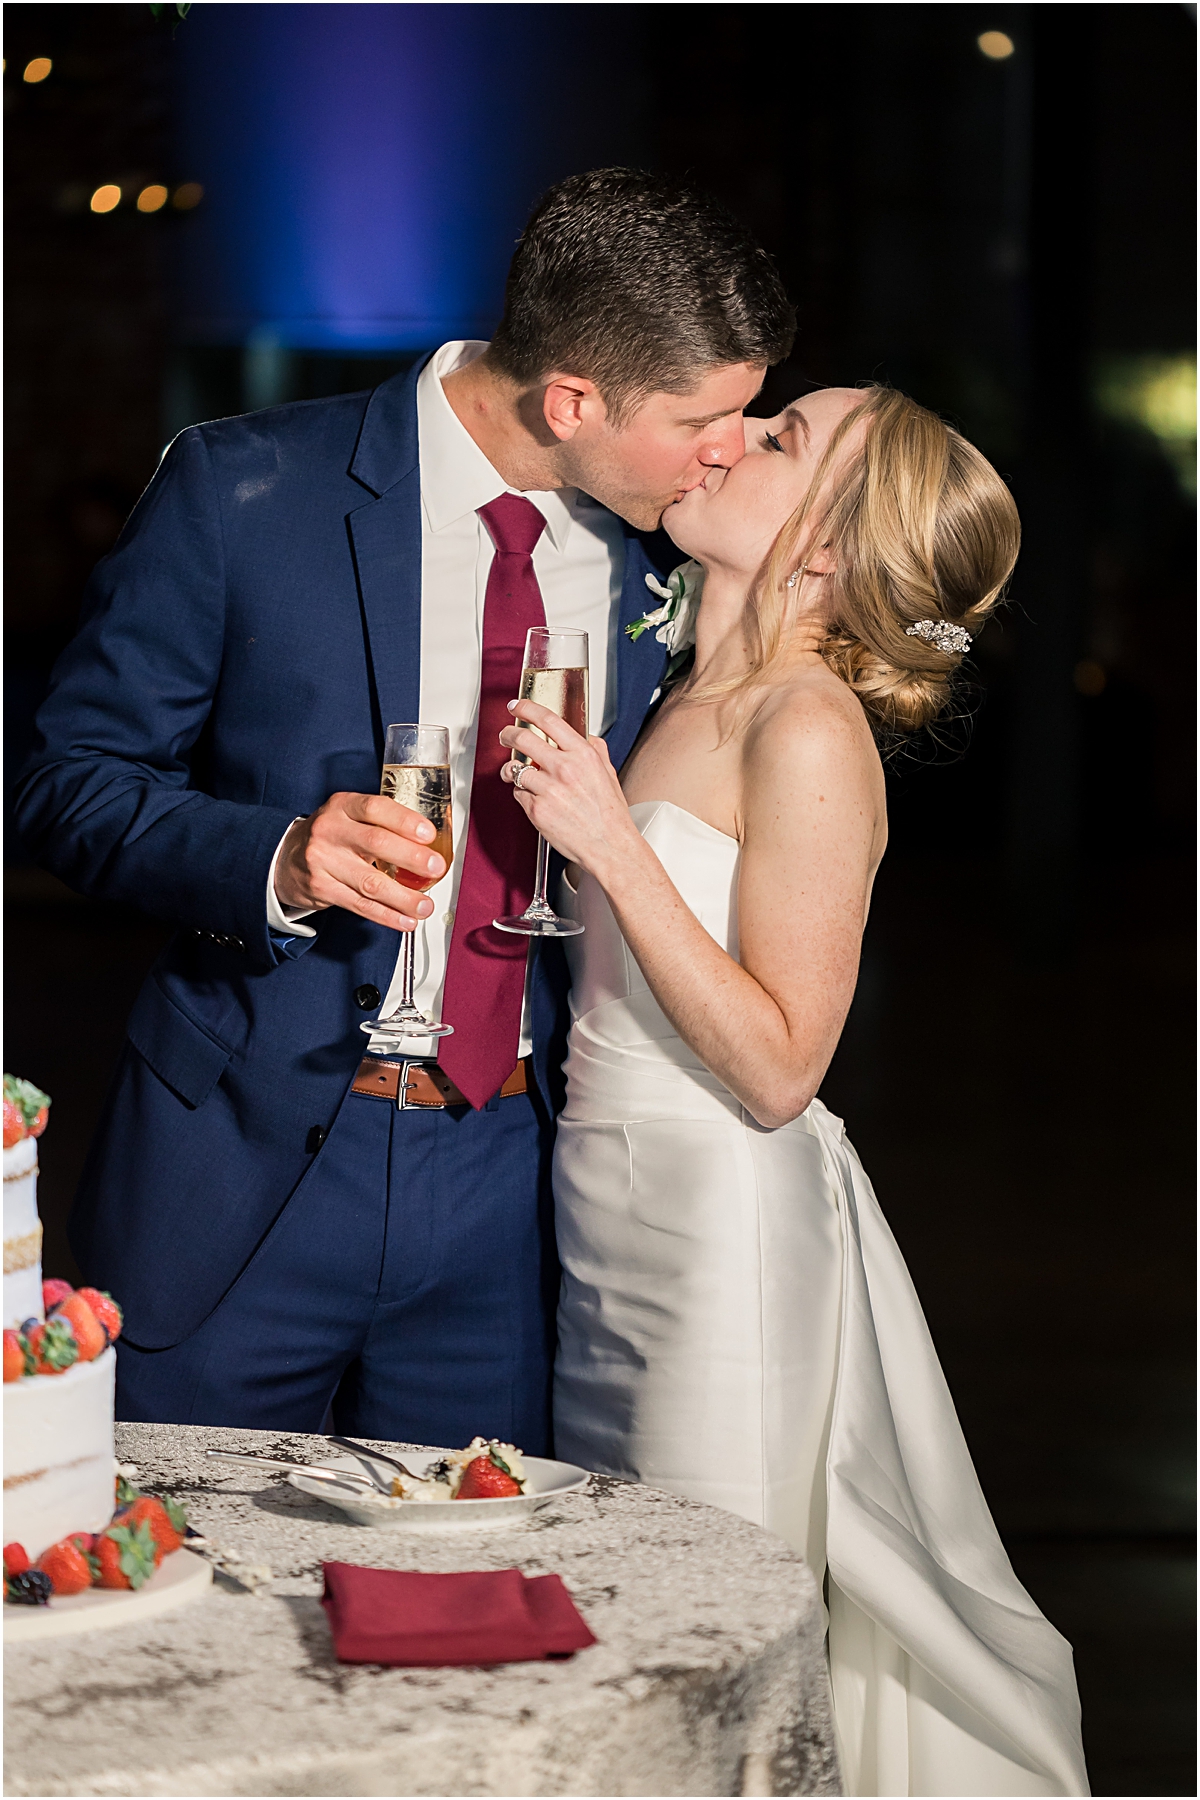 rebecca and john kissing while holding glasses of champagne during their wedding reception at a georgia wedding venue